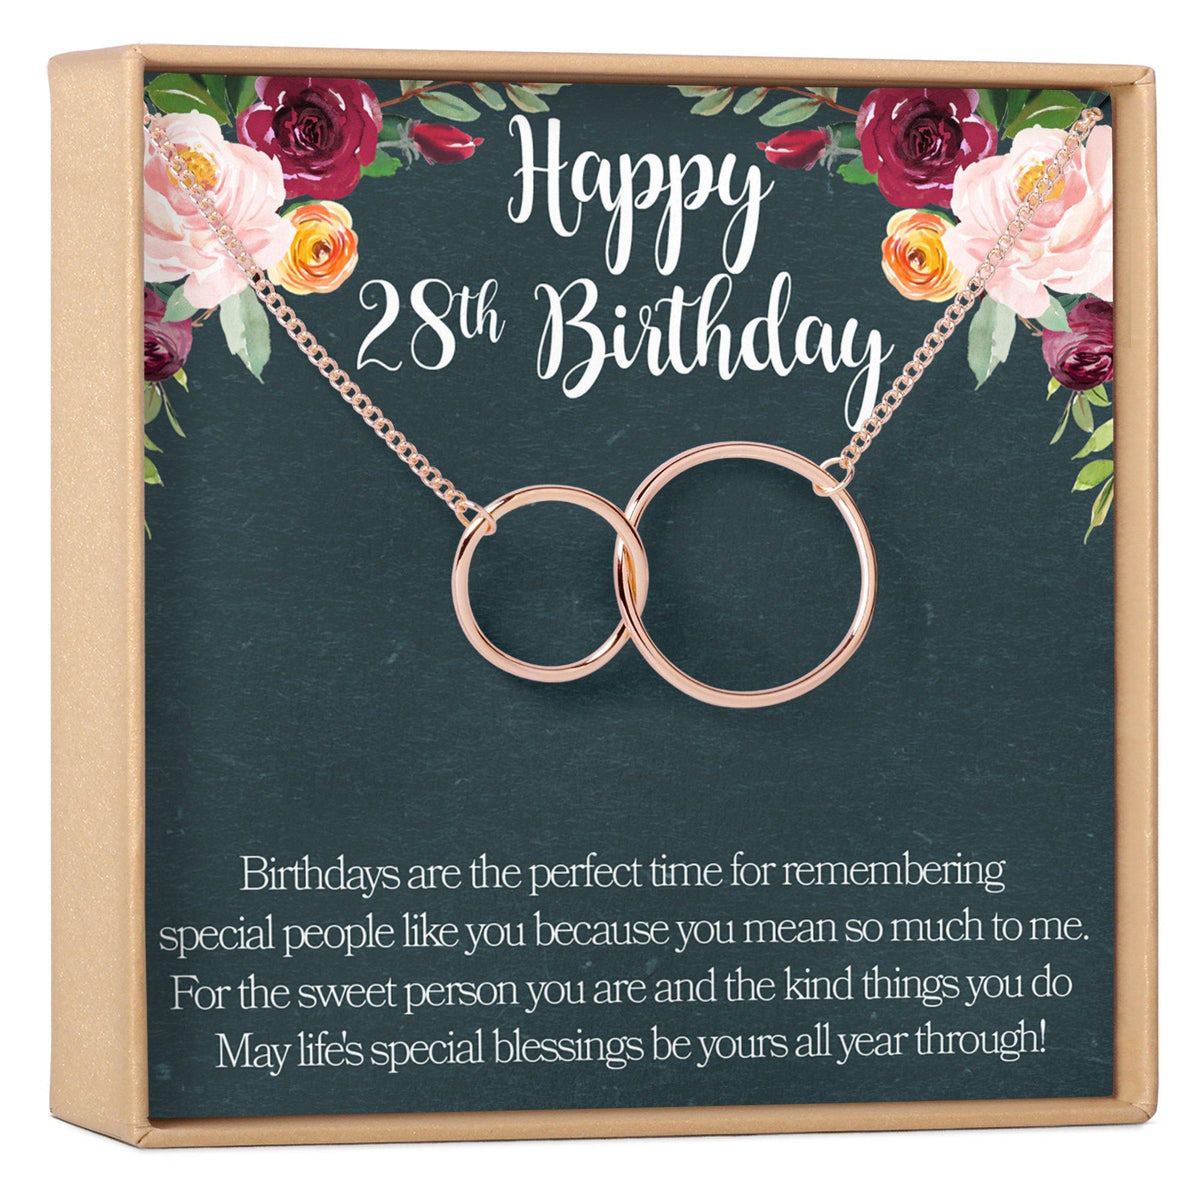 28th Birthday Necklace - Dear Ava, Jewelry / Necklaces / Pendants